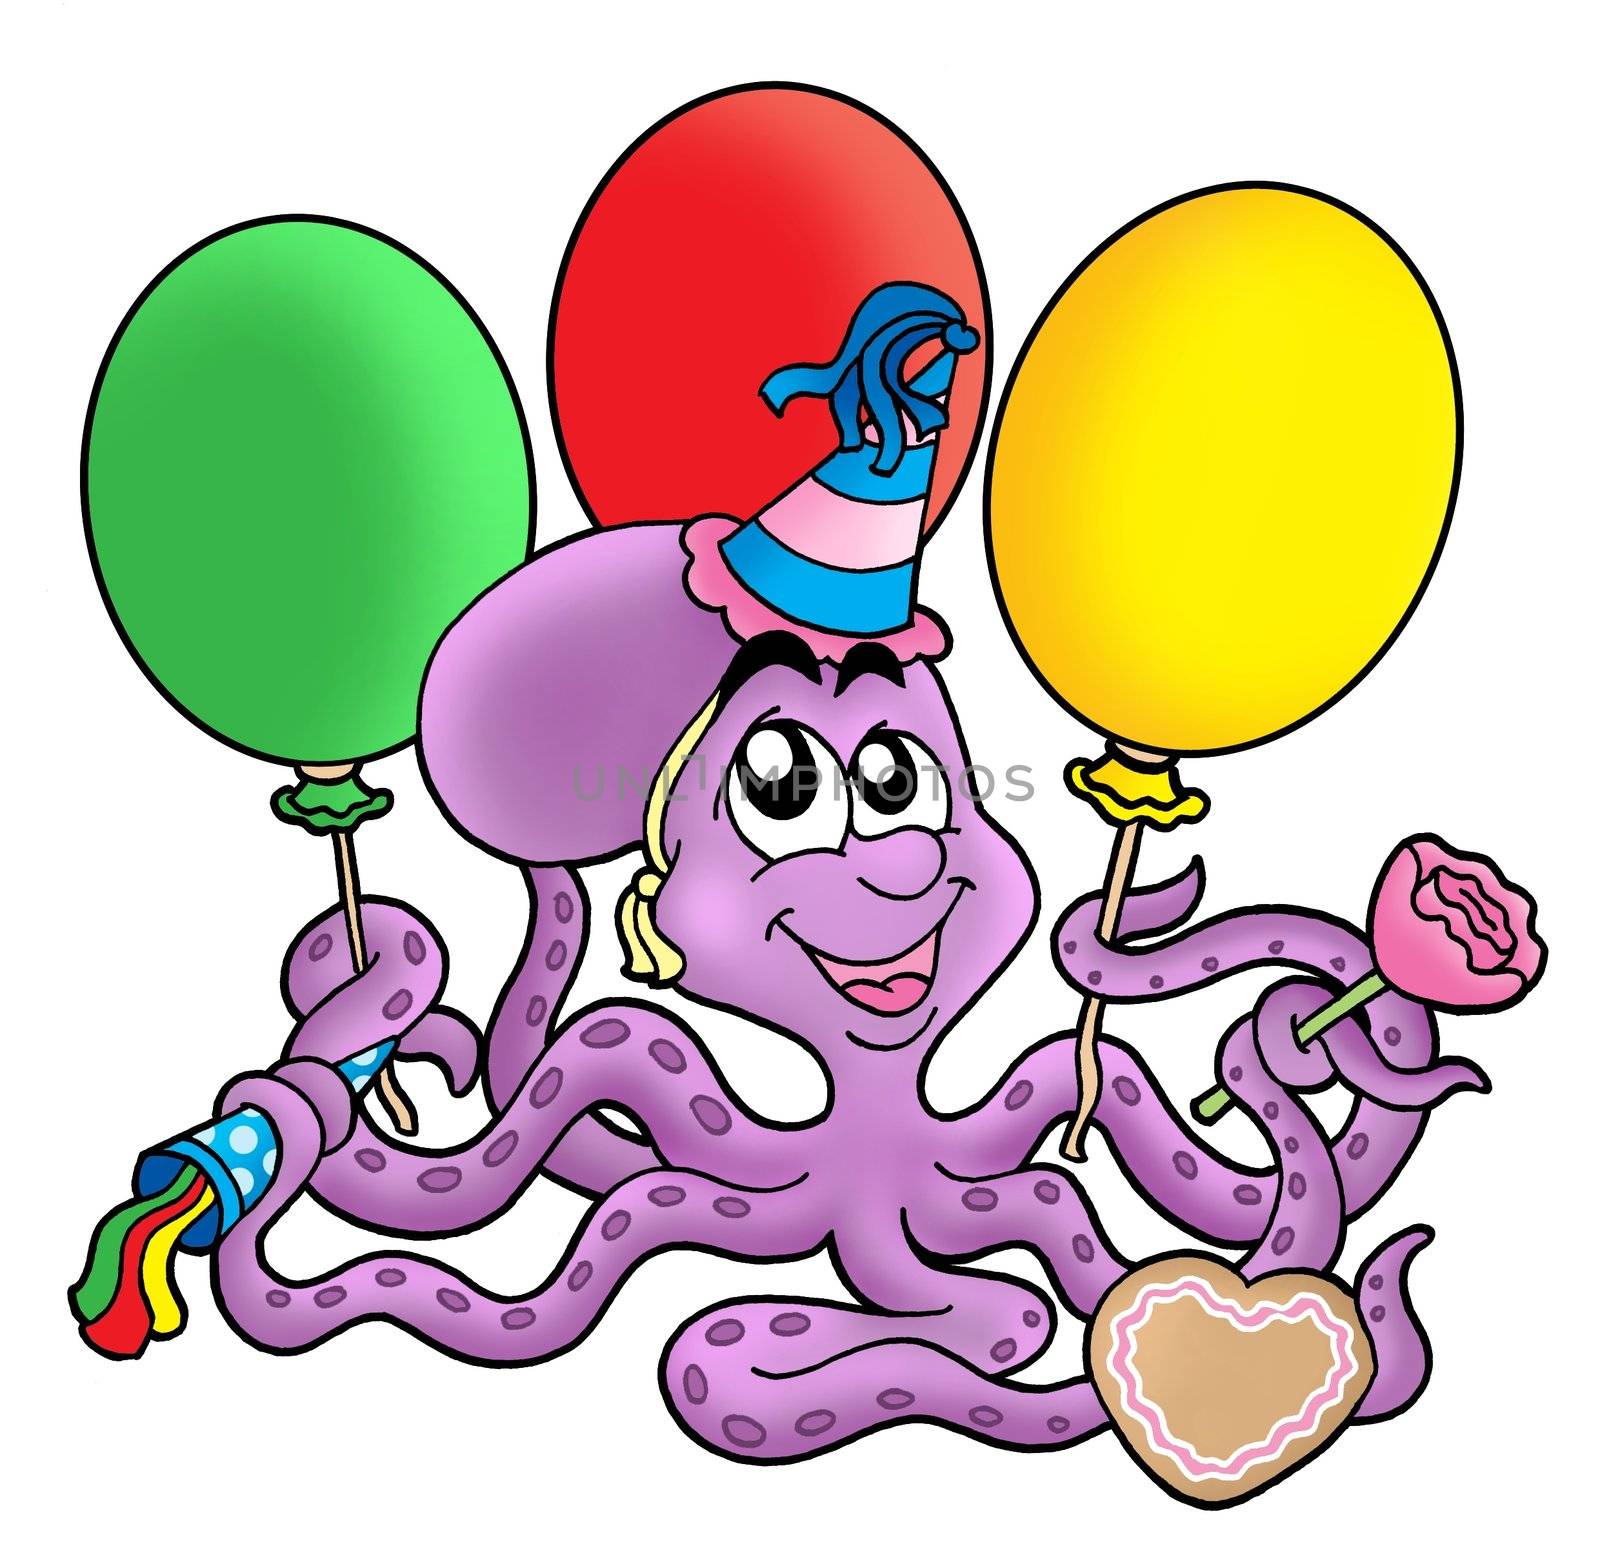 Octopus with ballons by clairev